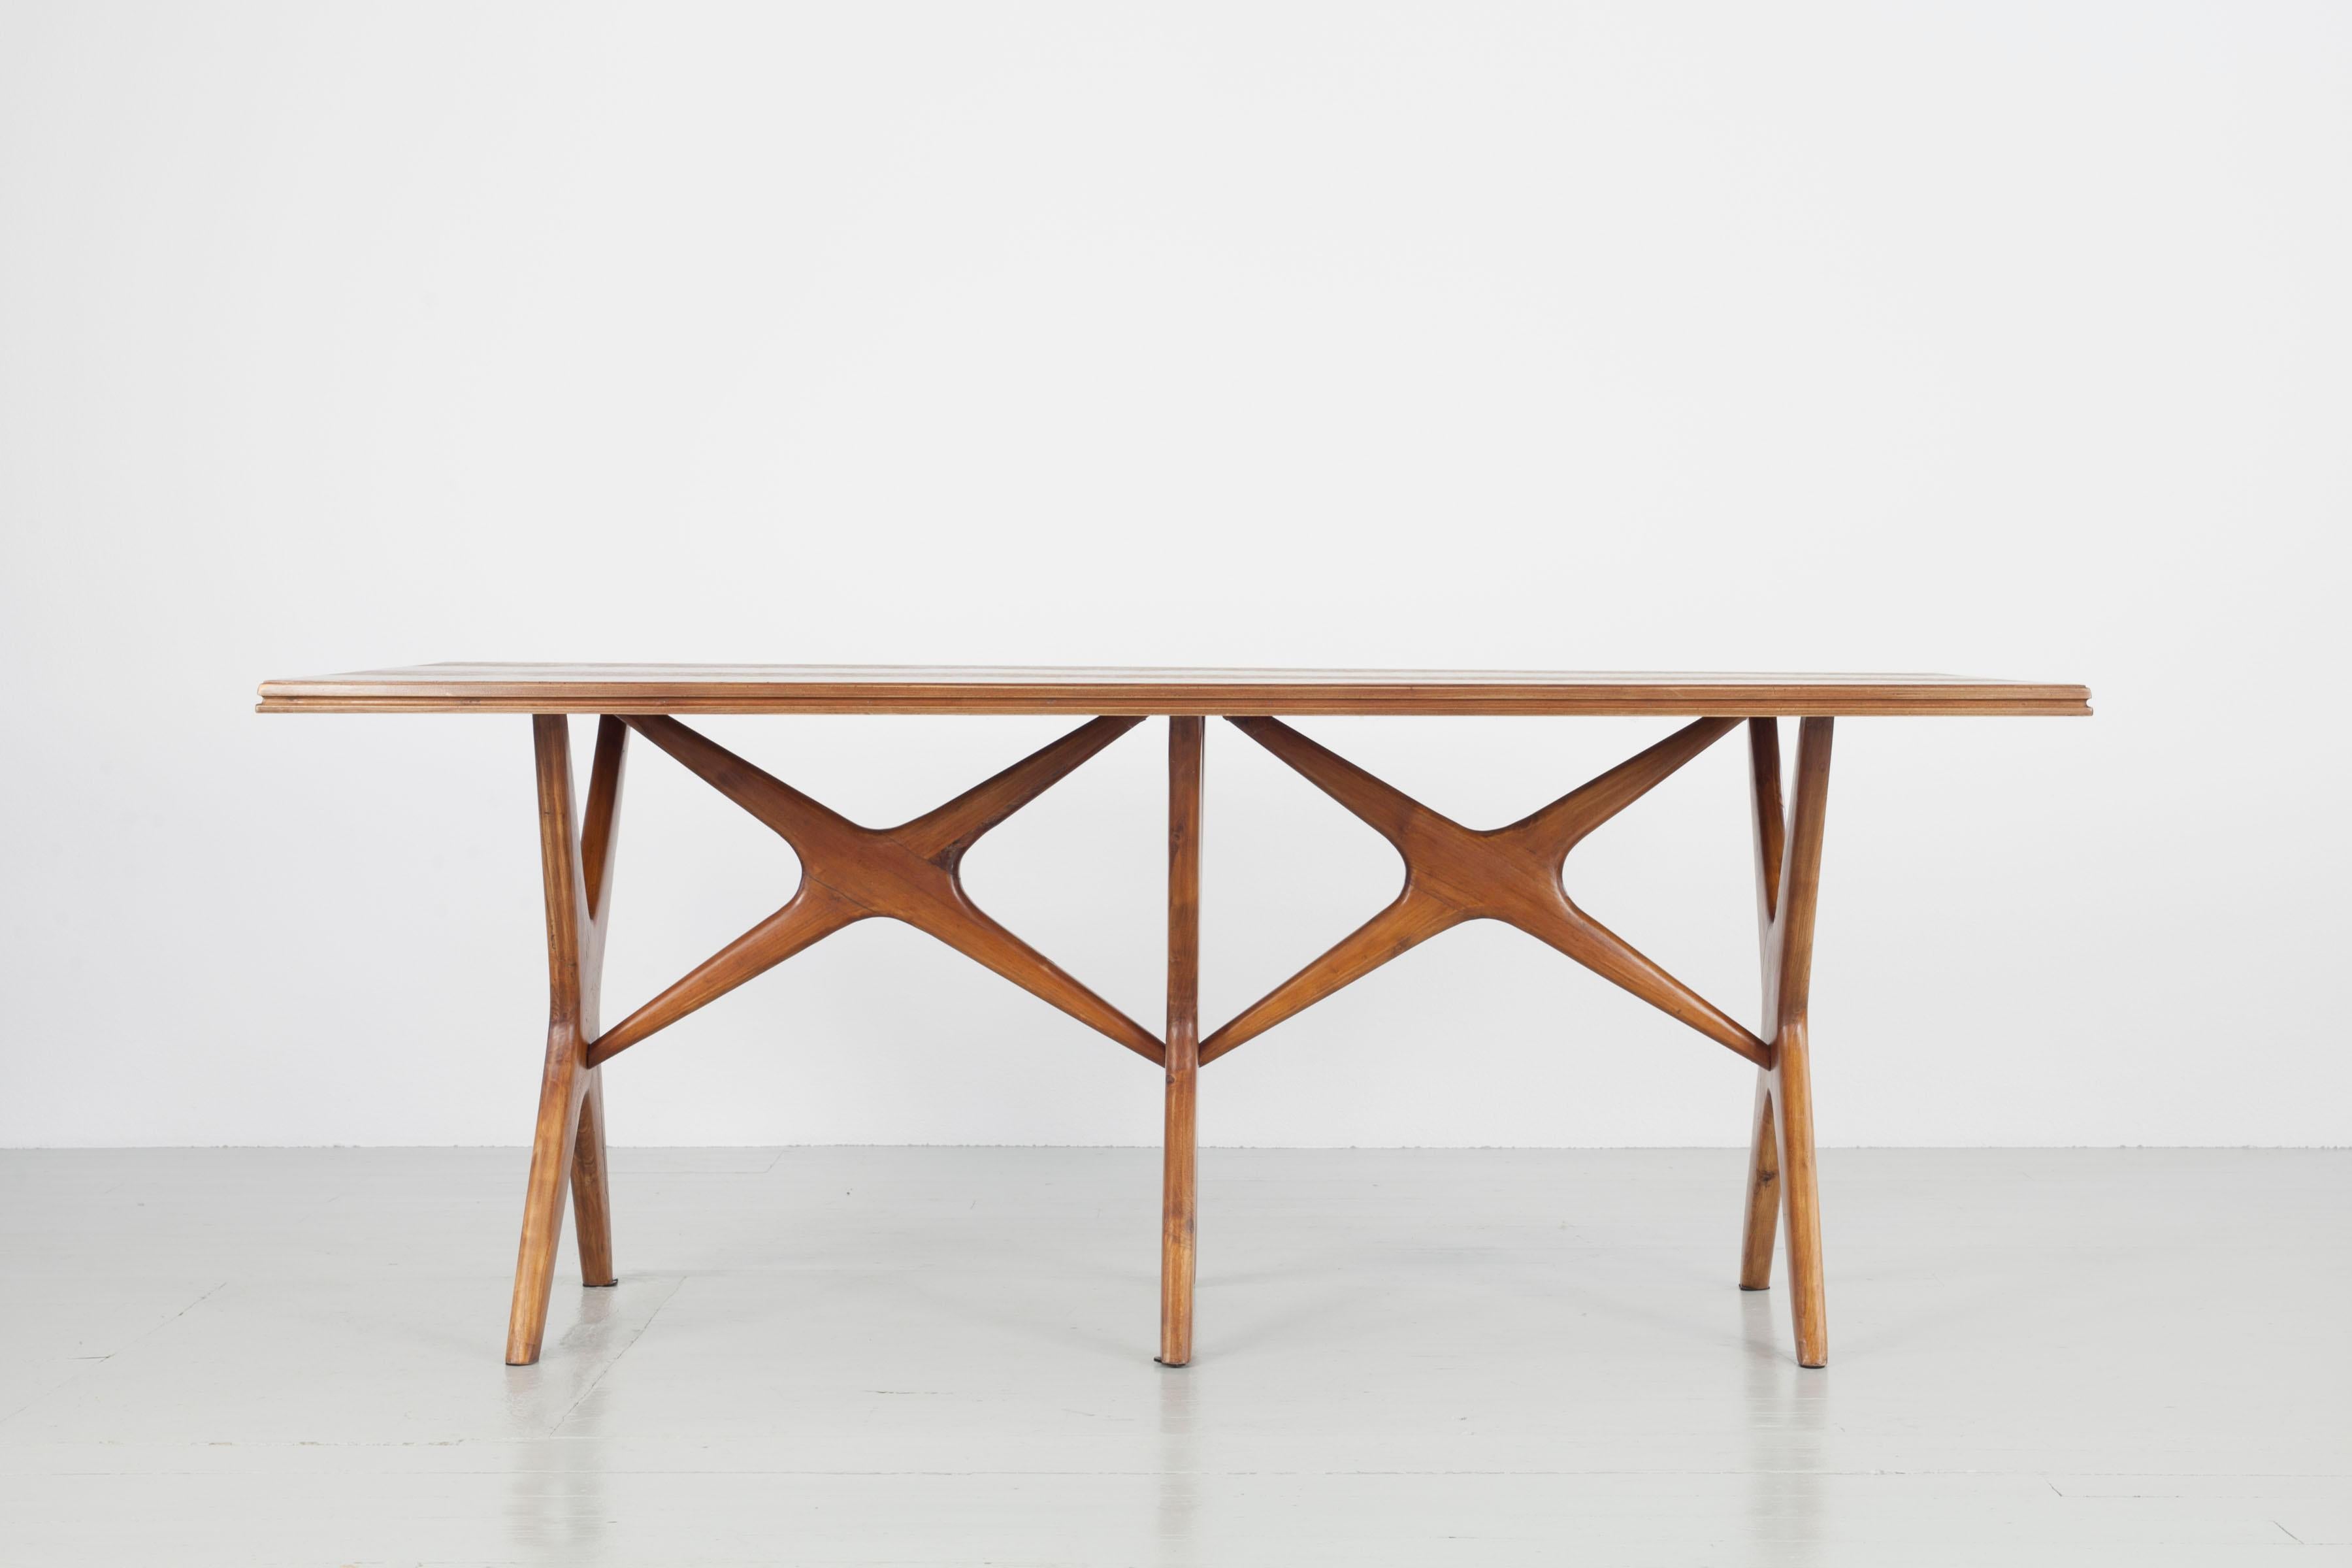 Dining Table with recurring cross motive in table legs and strutting. This is a particular interesting design element because form and function are tied very close together. The roundness of the structural element creates texture and elegance within